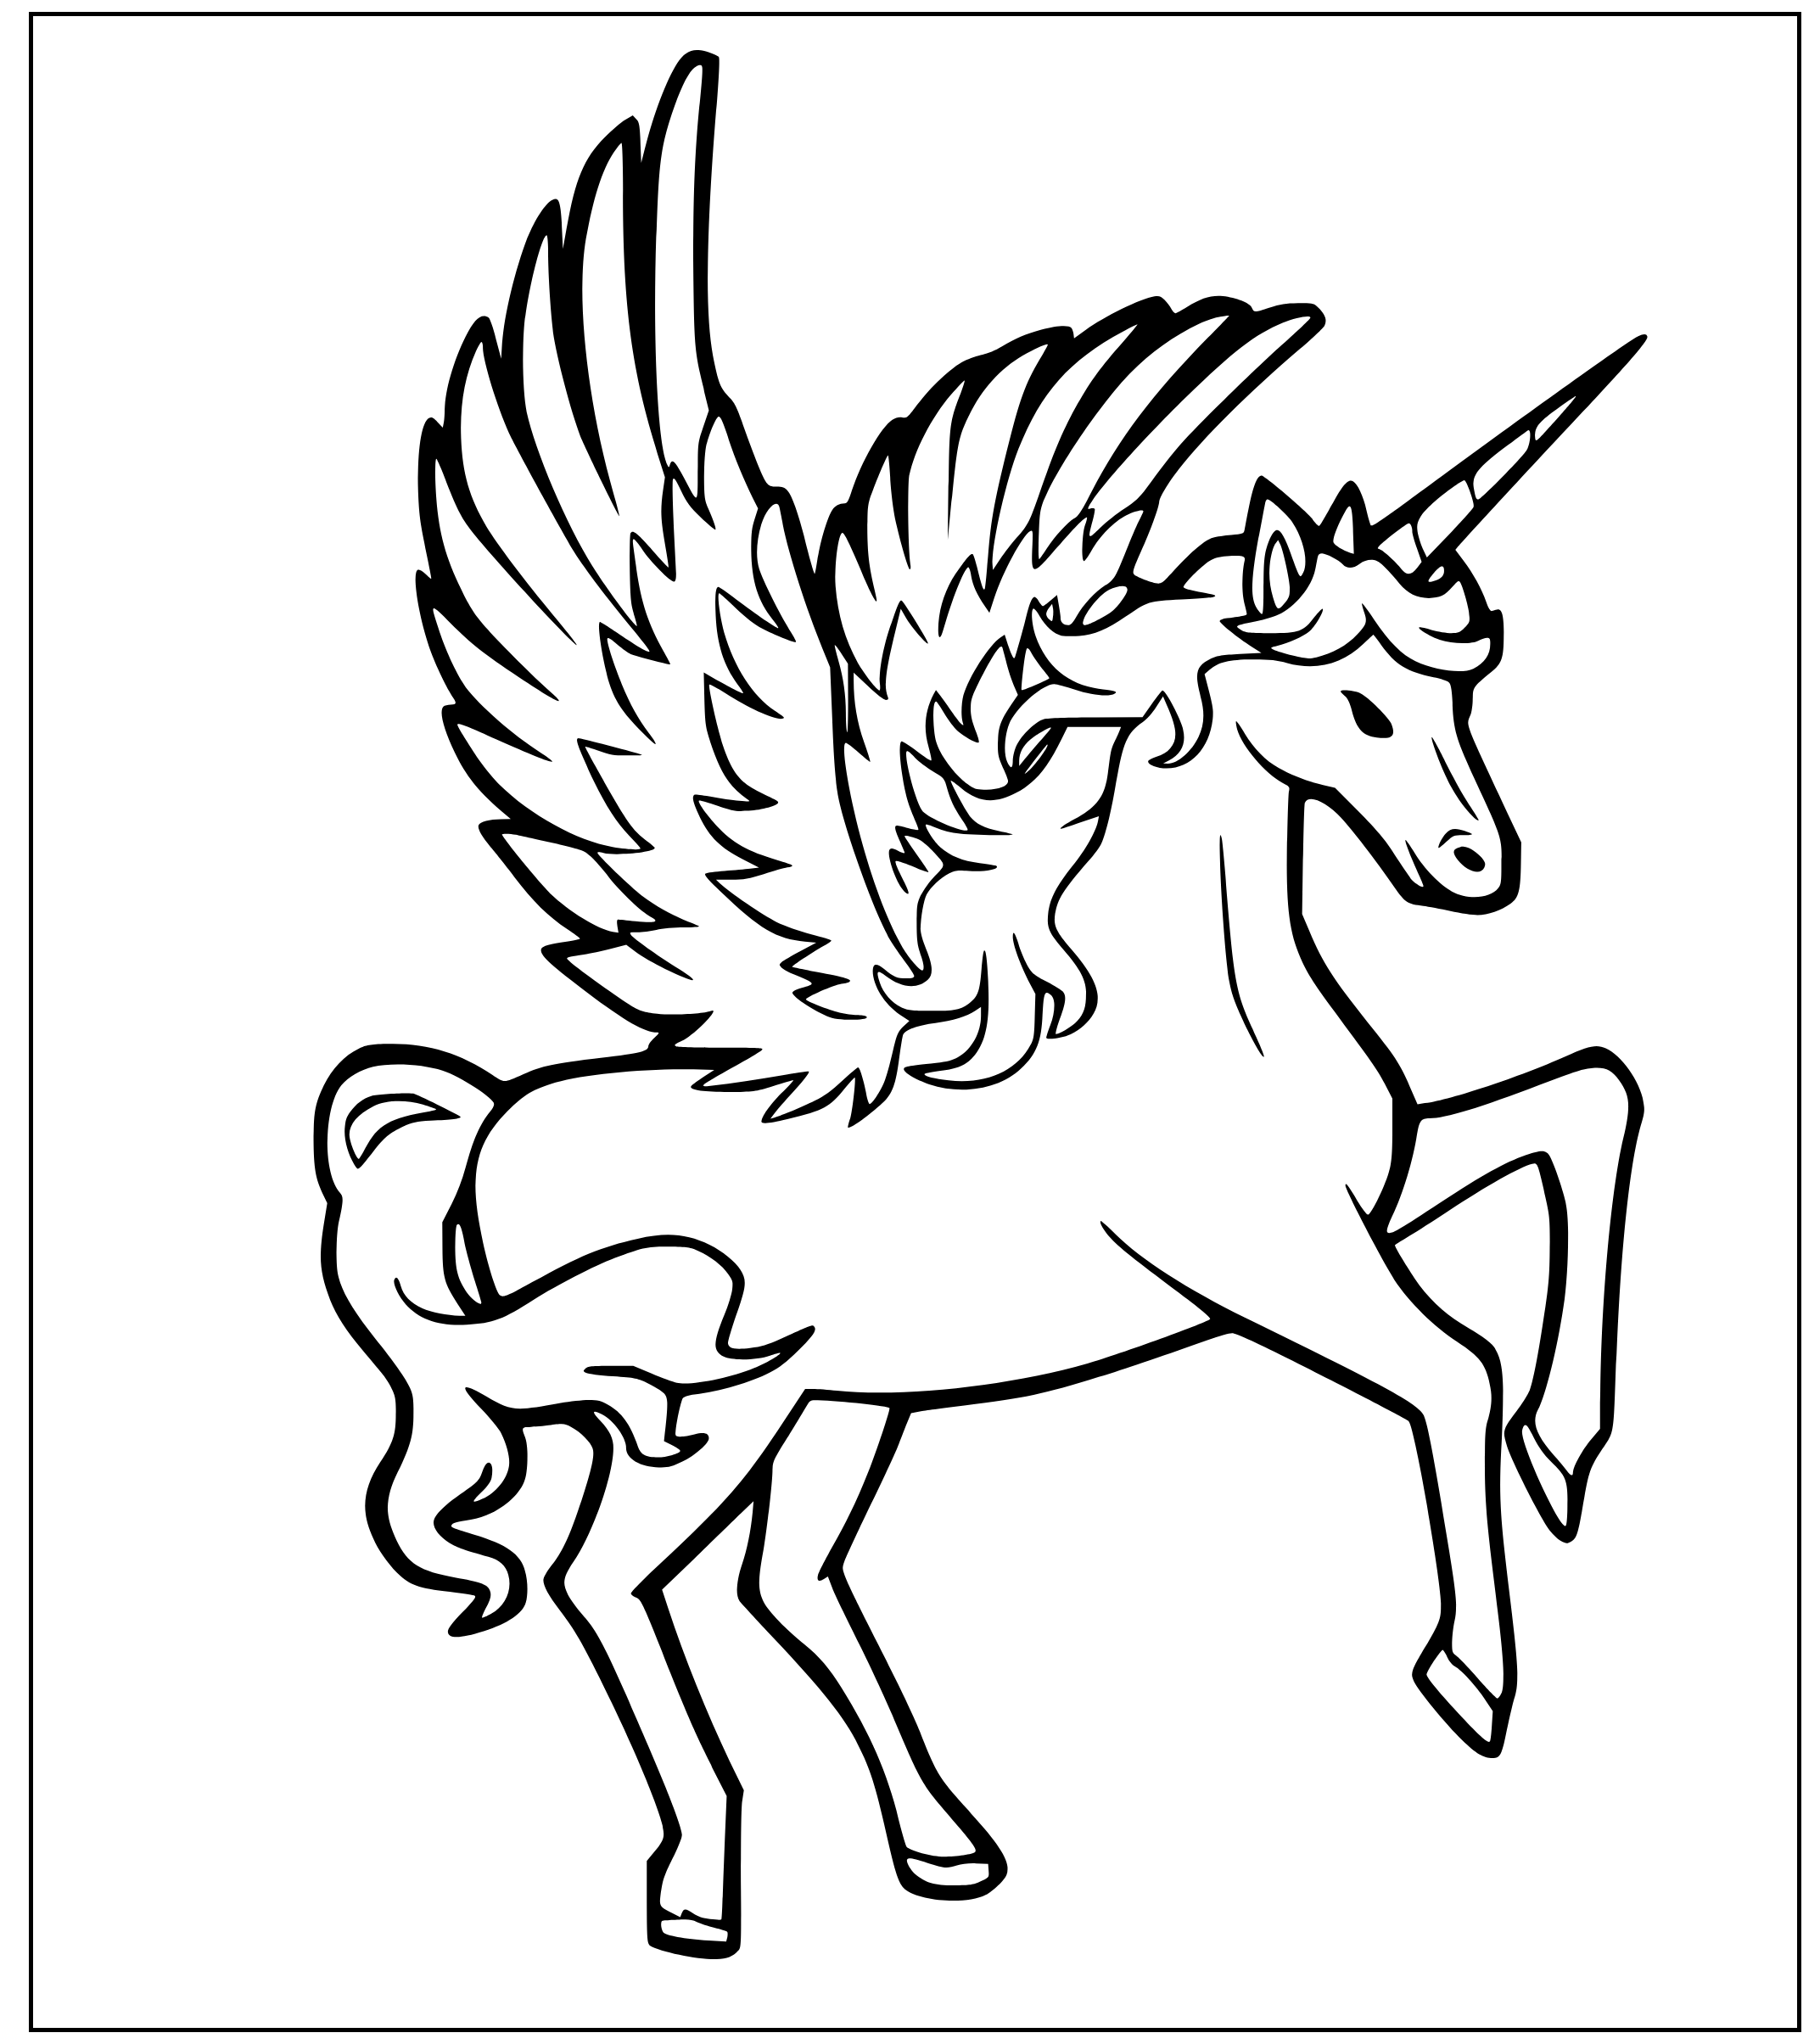 Printable Noble Alicorn Coloring Page for kids.